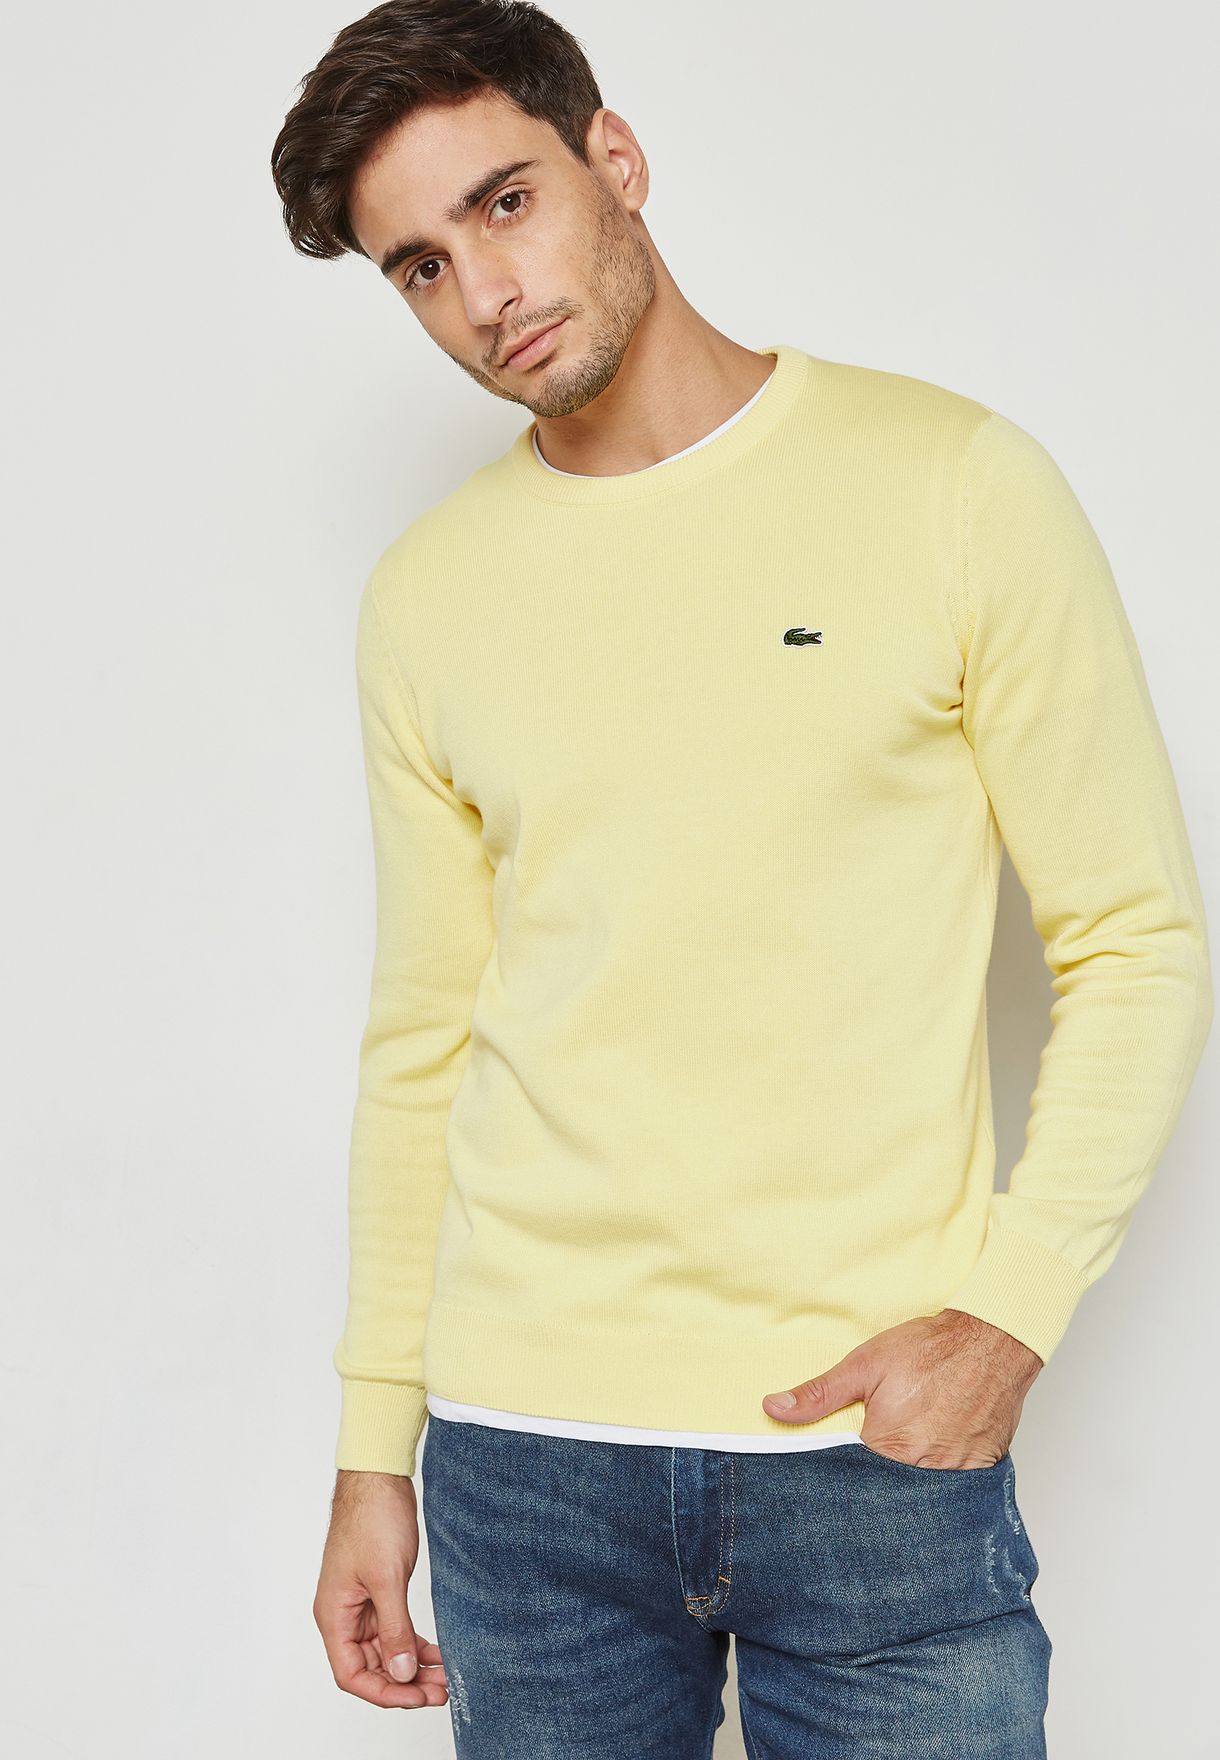 Buy Lacoste yellow Classic Sweater for 